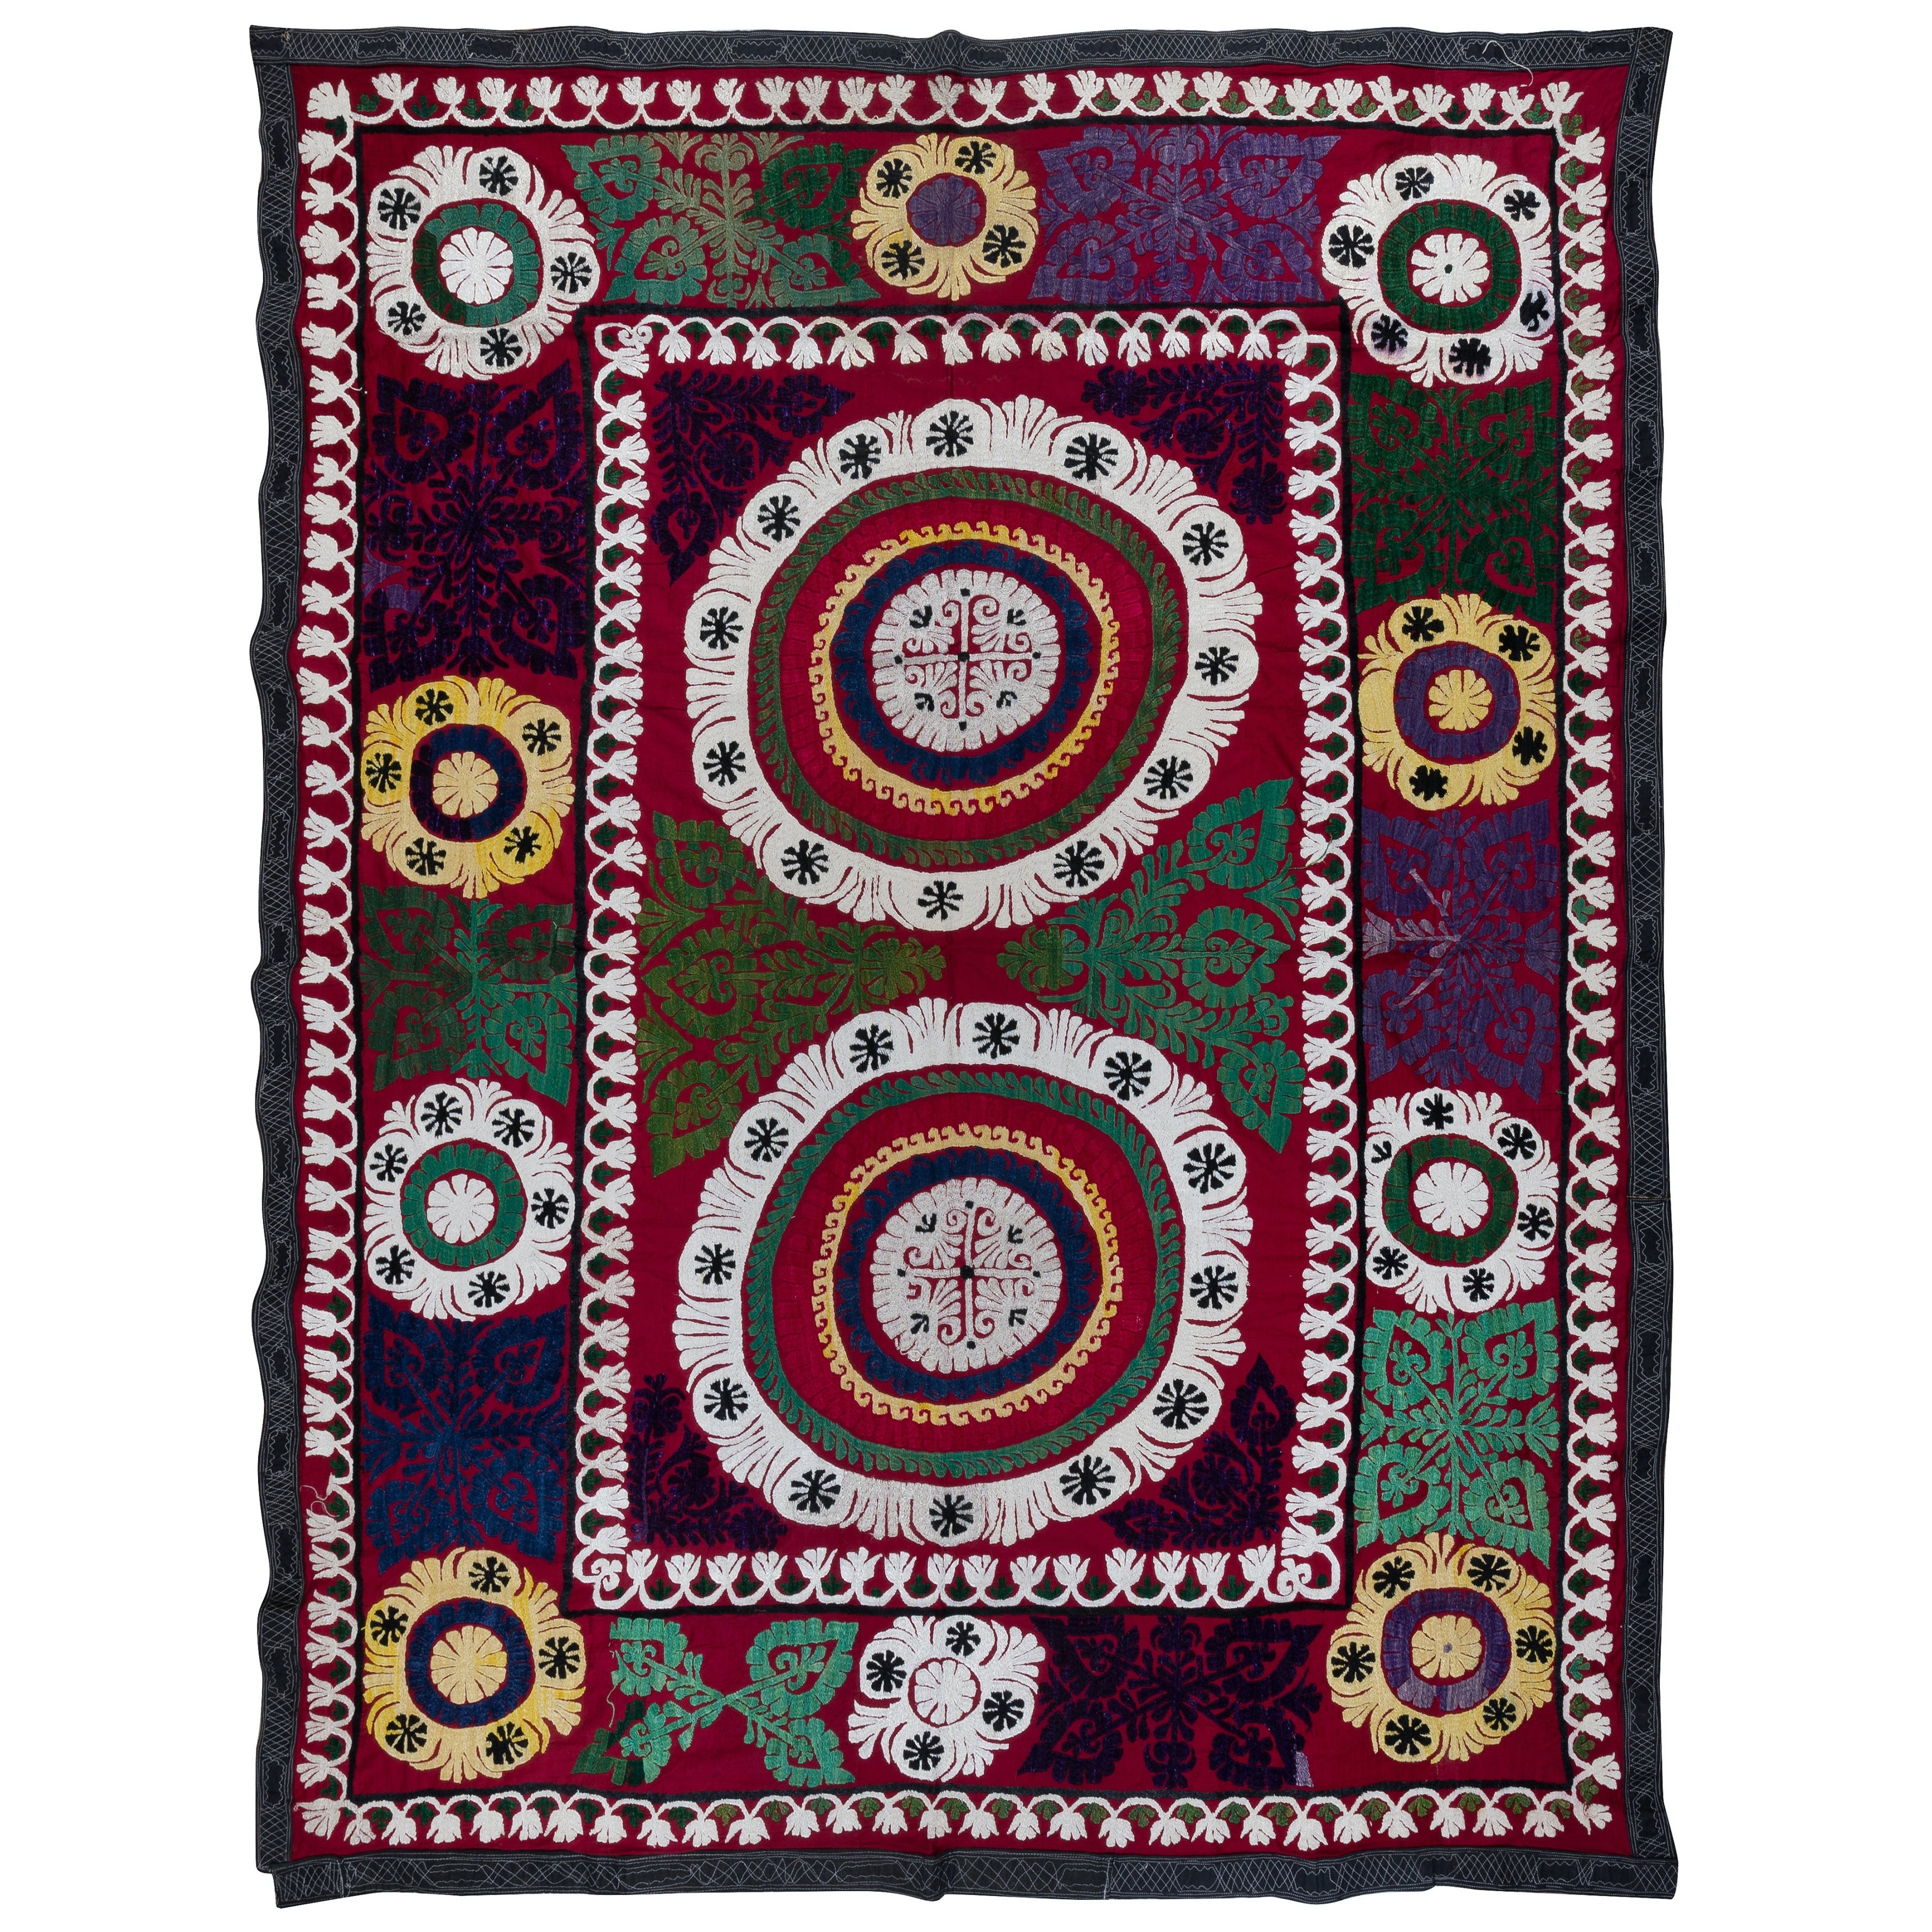 5.7x7.6 ft Vintage Silk Embroidery Wall Hanging, Colorful Uzbek Suzani Bed Cover For Sale